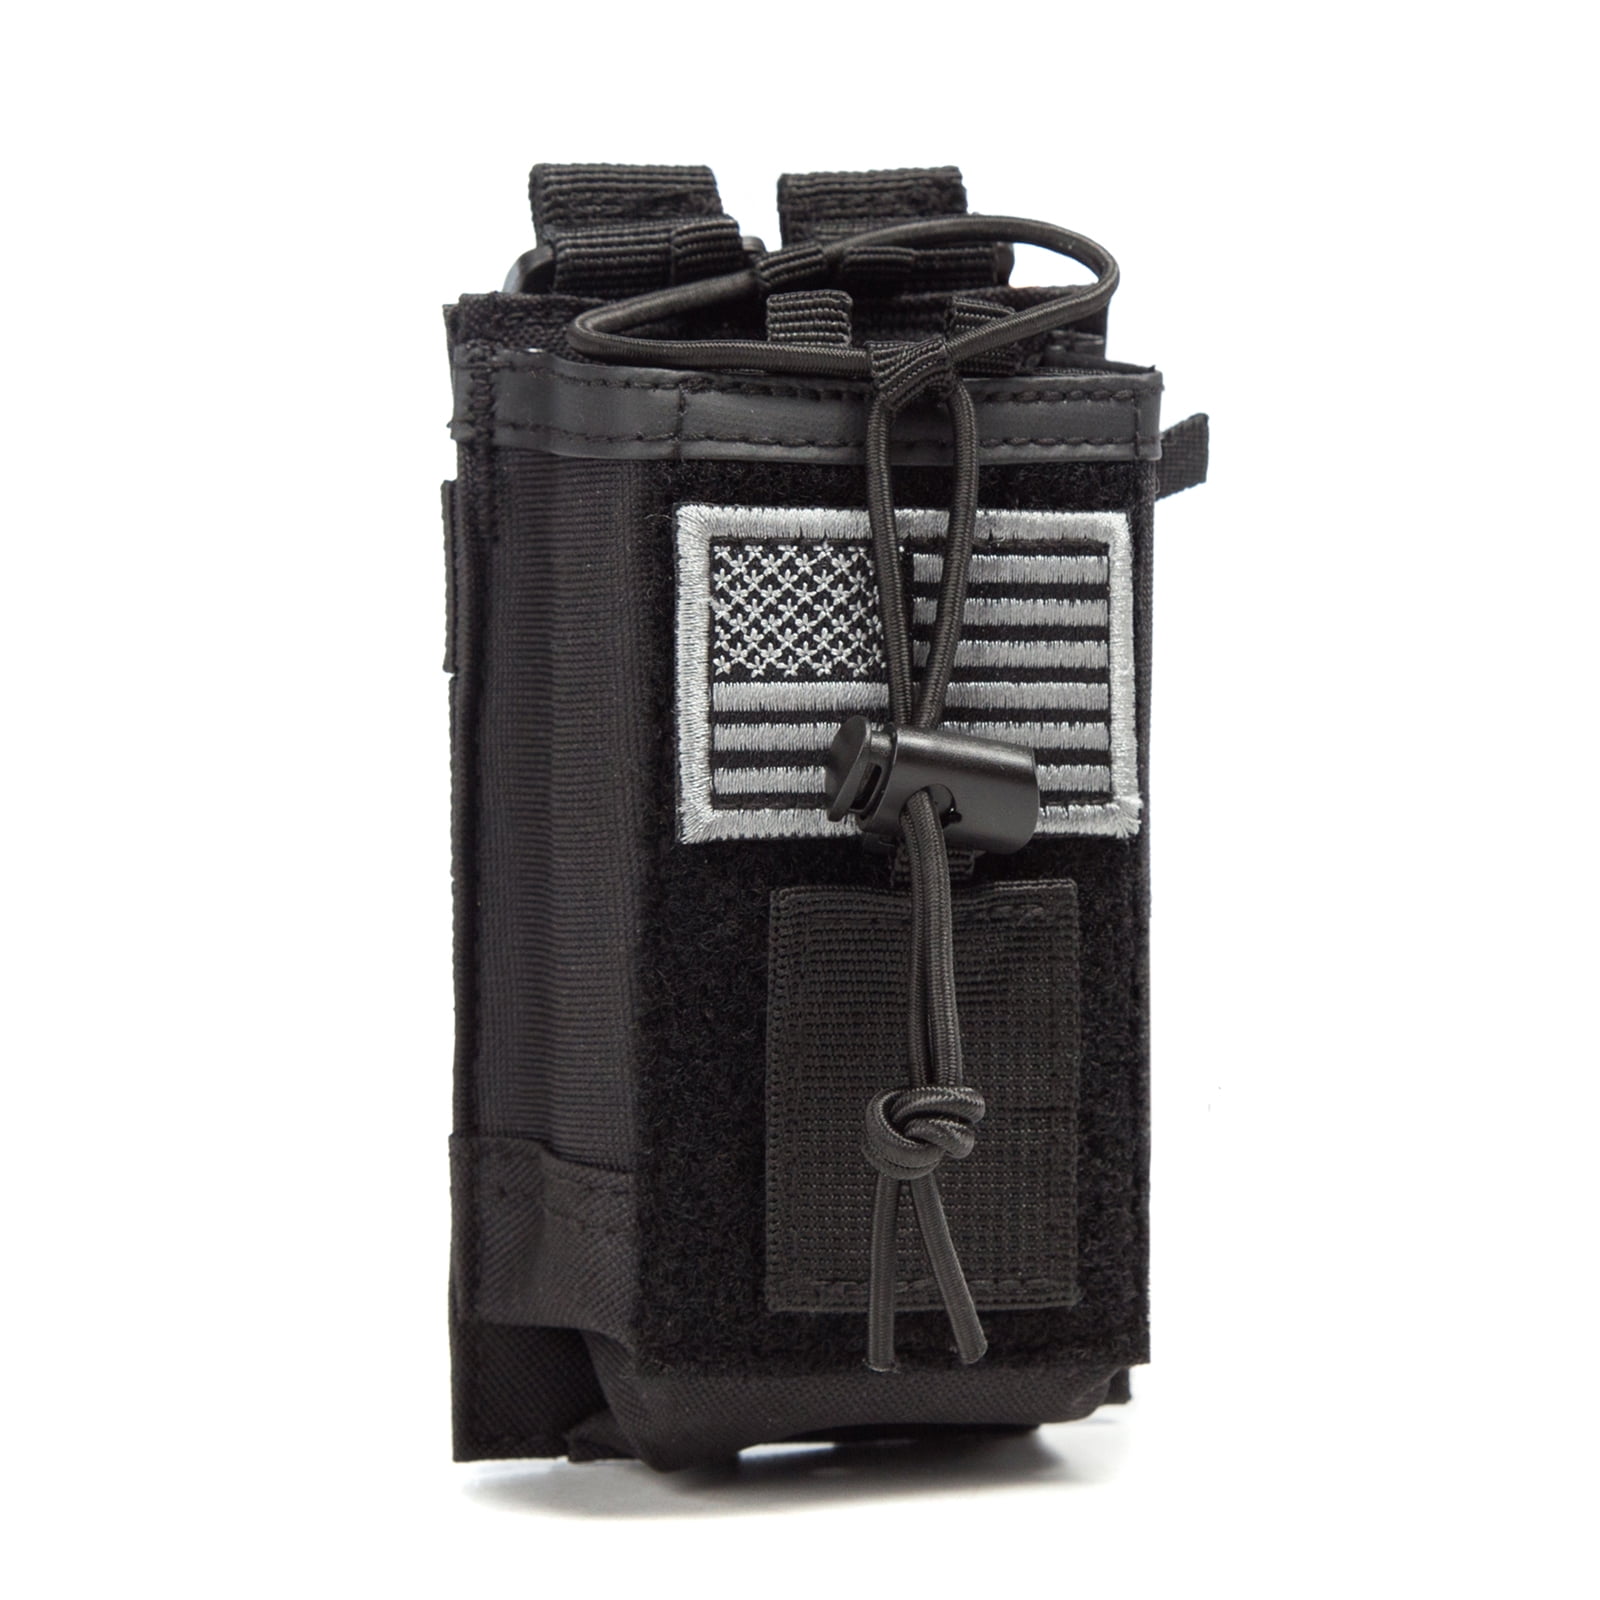  Tactical Universal Radio Holster/Radio Pouch Holder